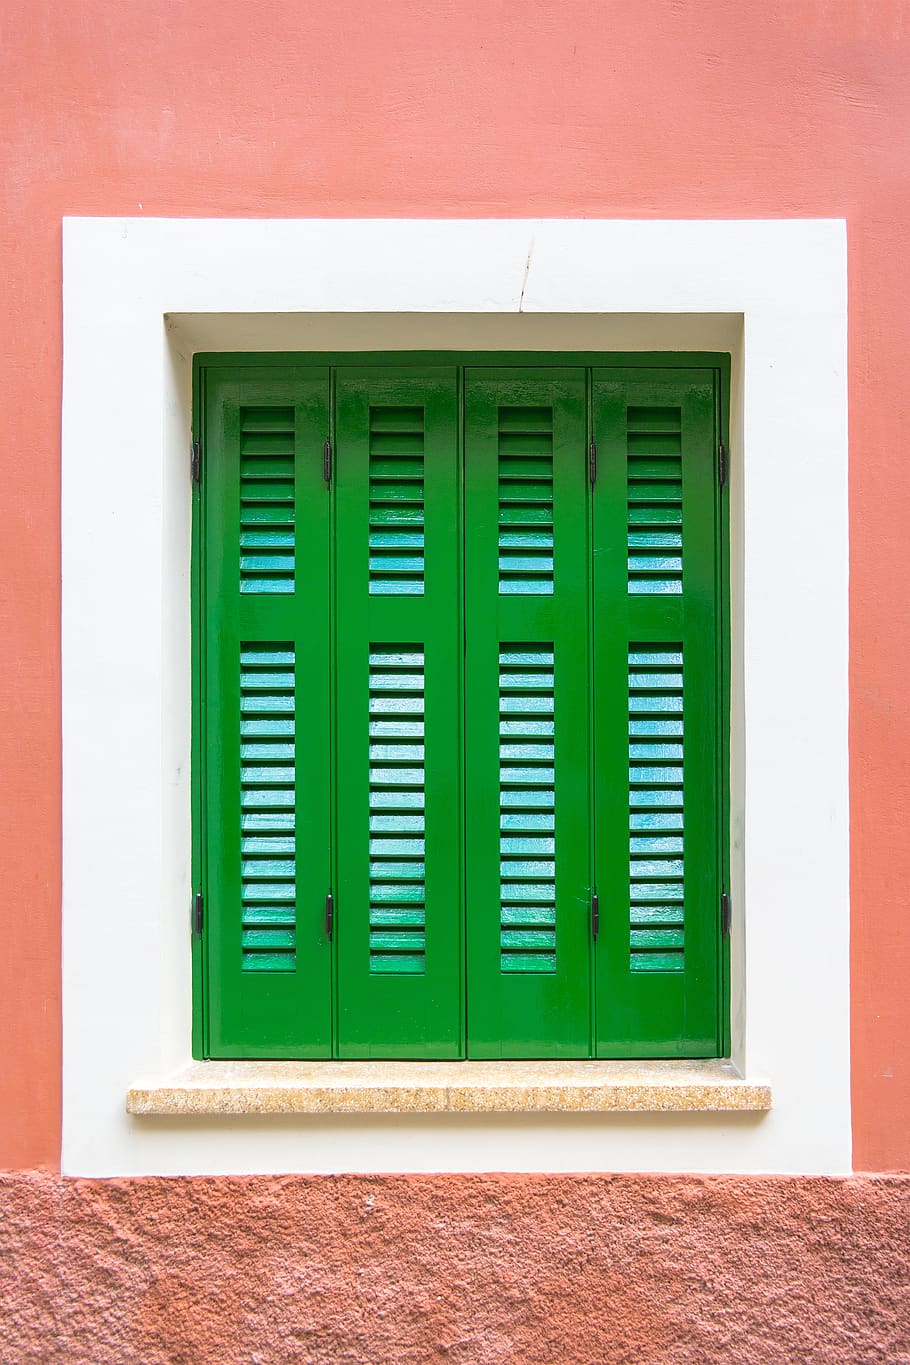 green, window, frame, closed, shutter, red, wall, green color, built structure, wall - building feature